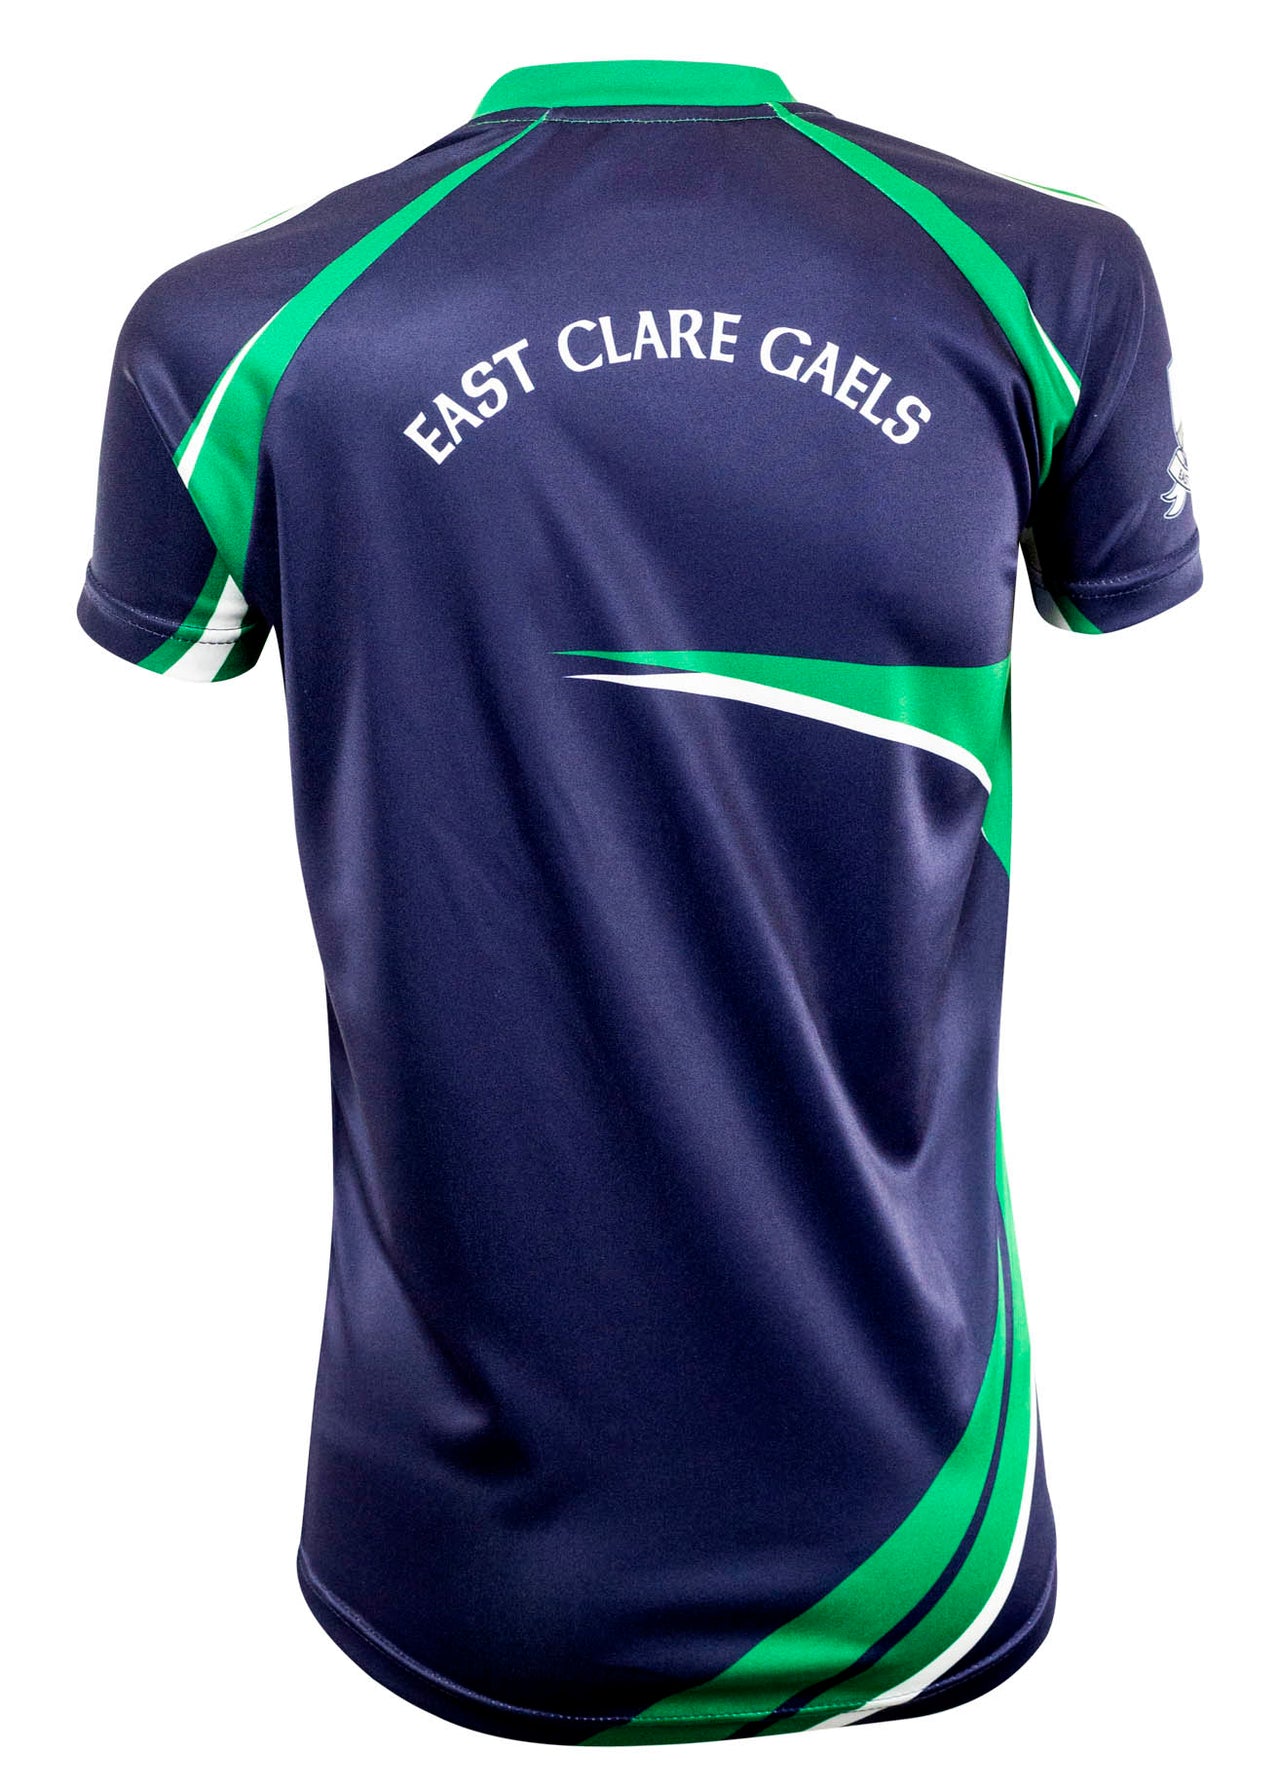 East Clare Gaels Home Jersey Regular Fit Adult